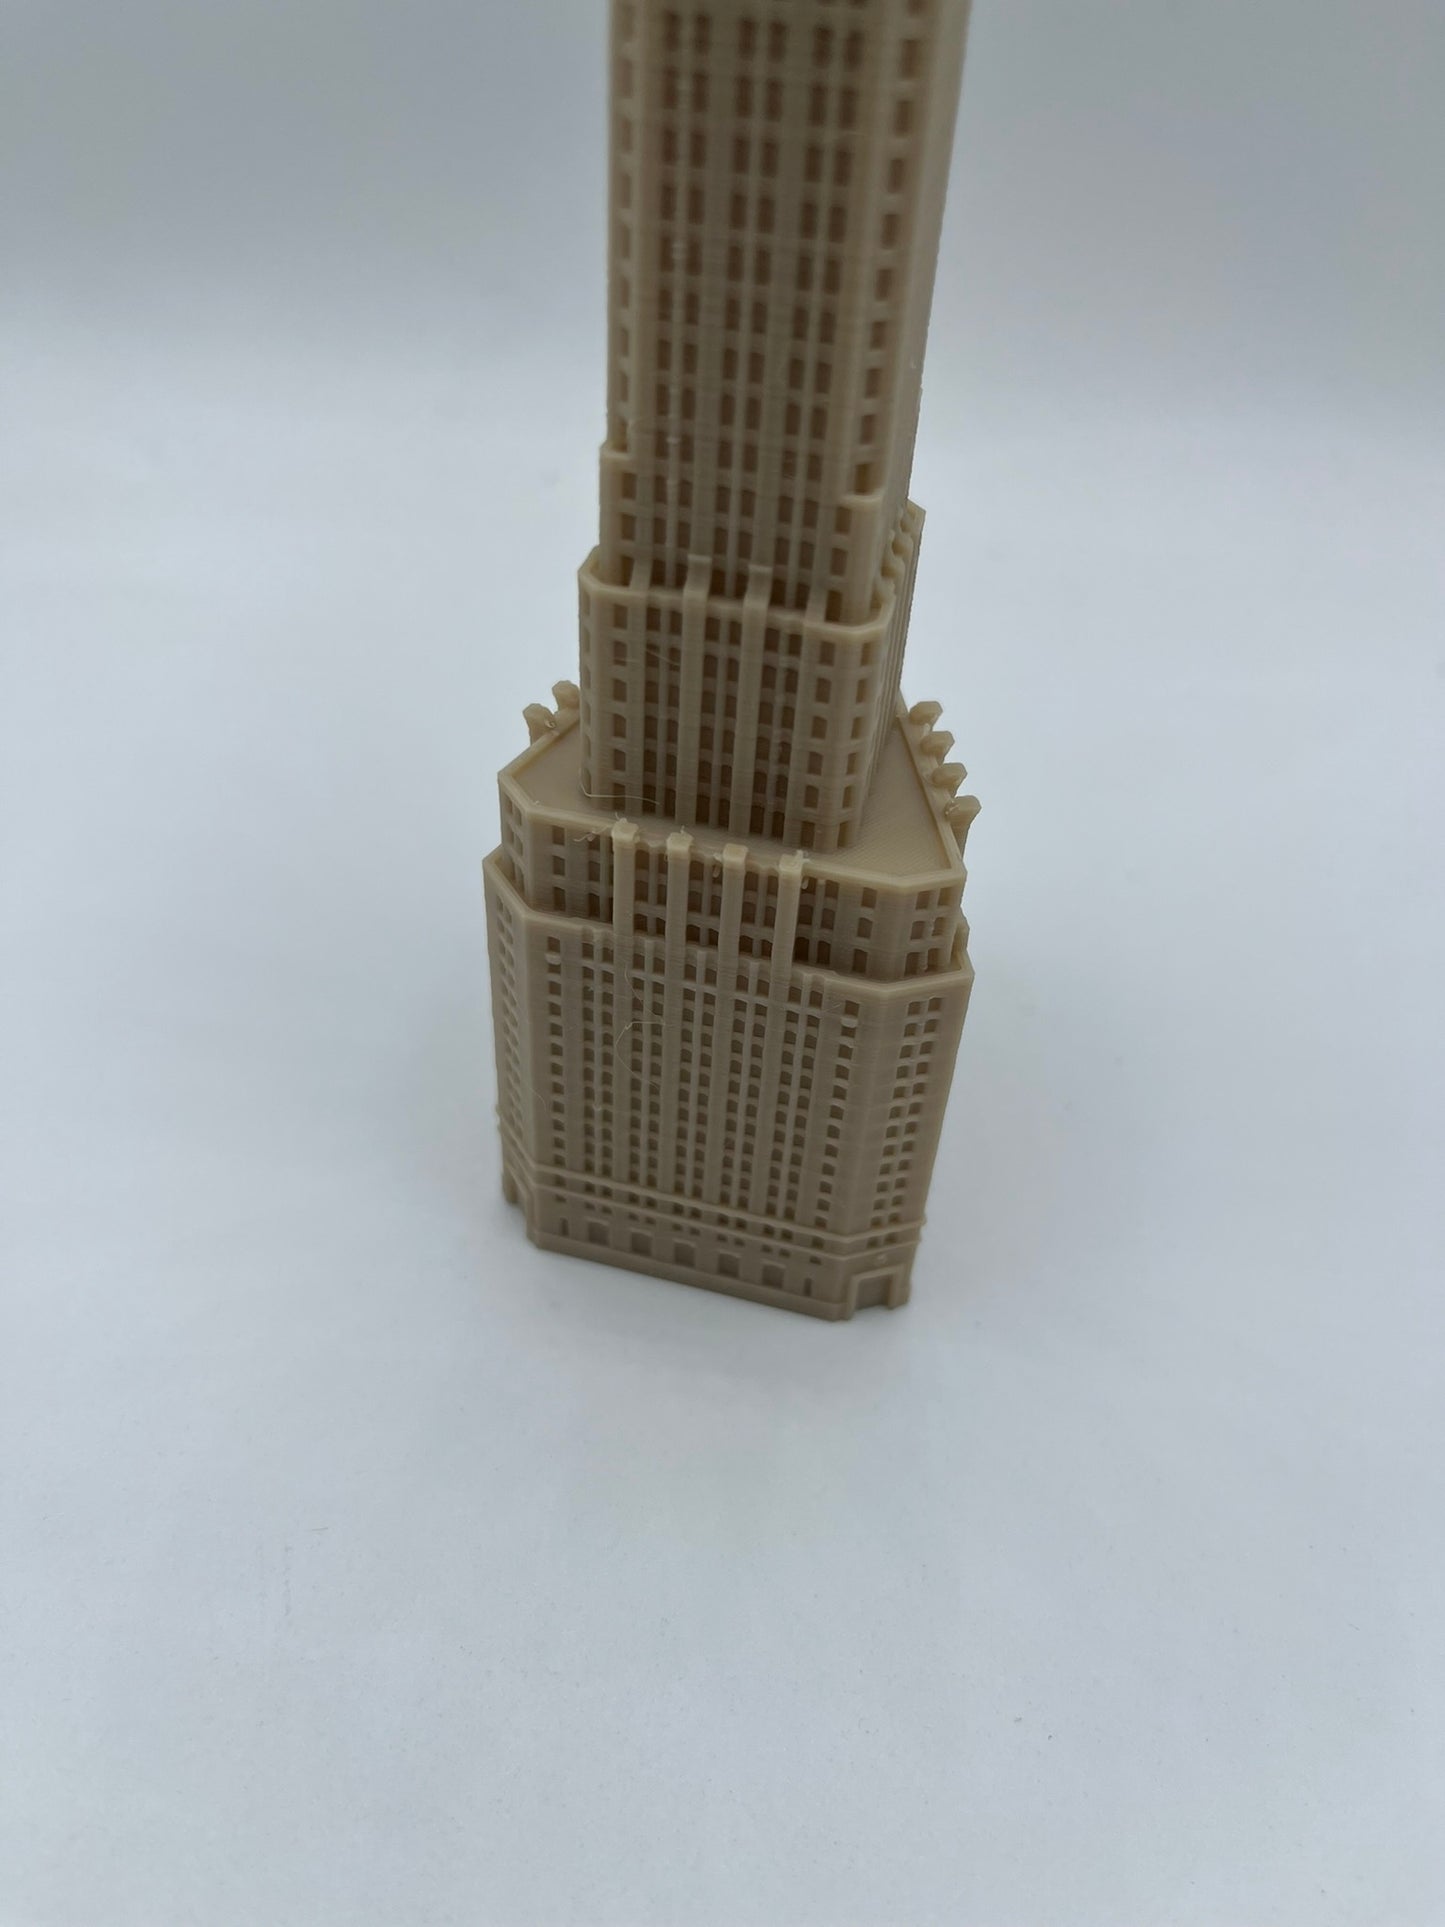 20 Exchange Place Model- 3D Printed